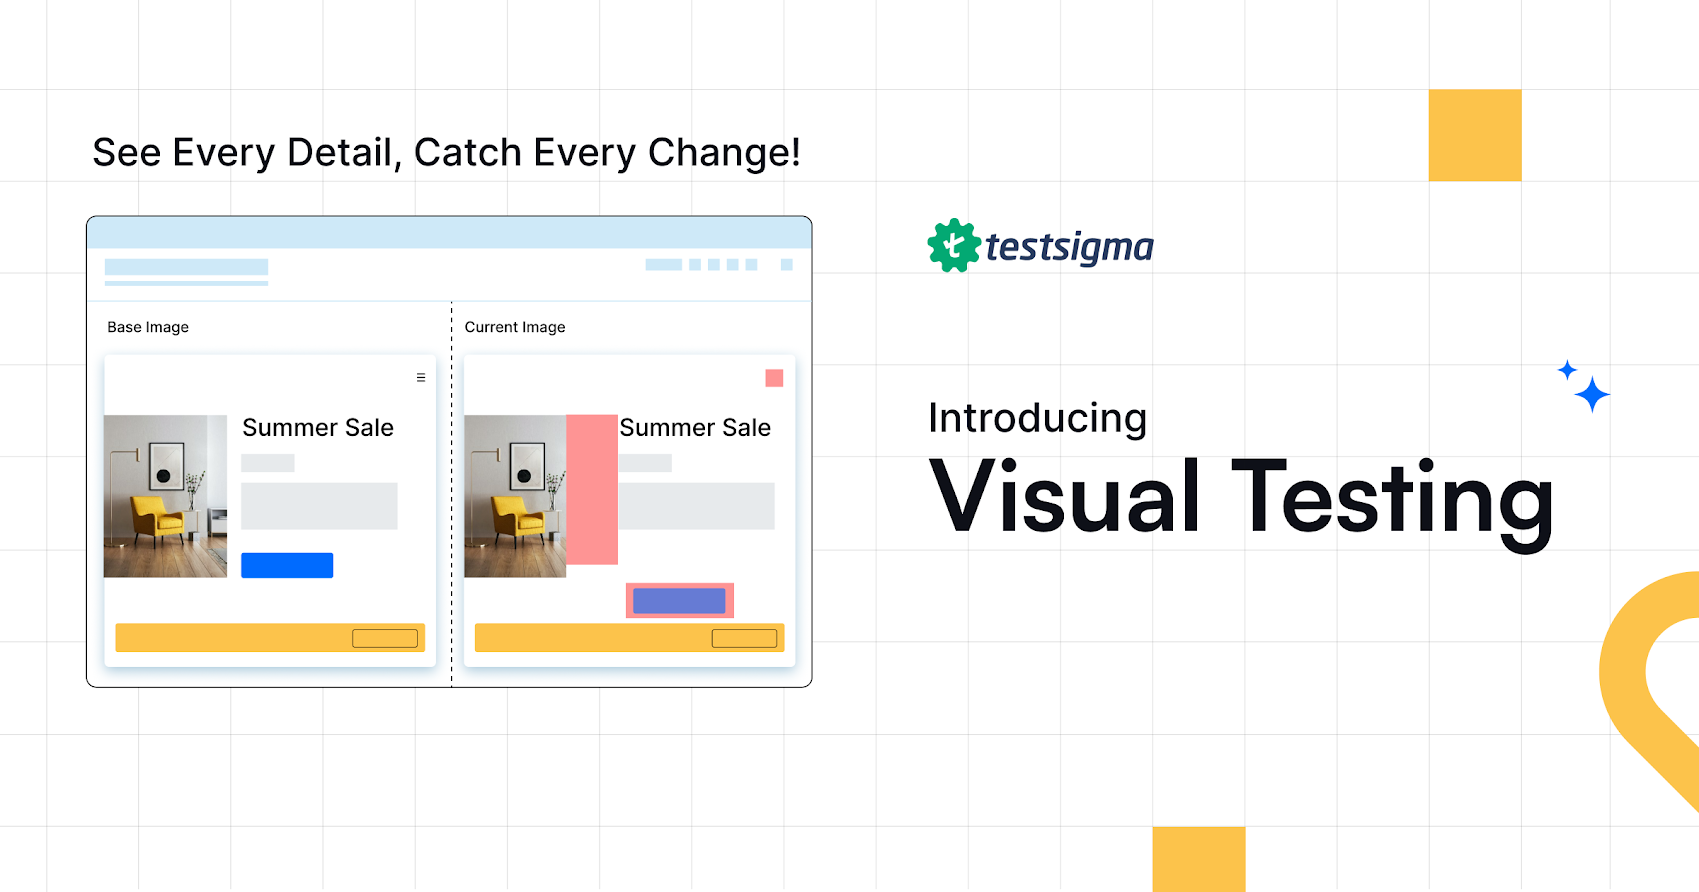 Launch of Visual testing